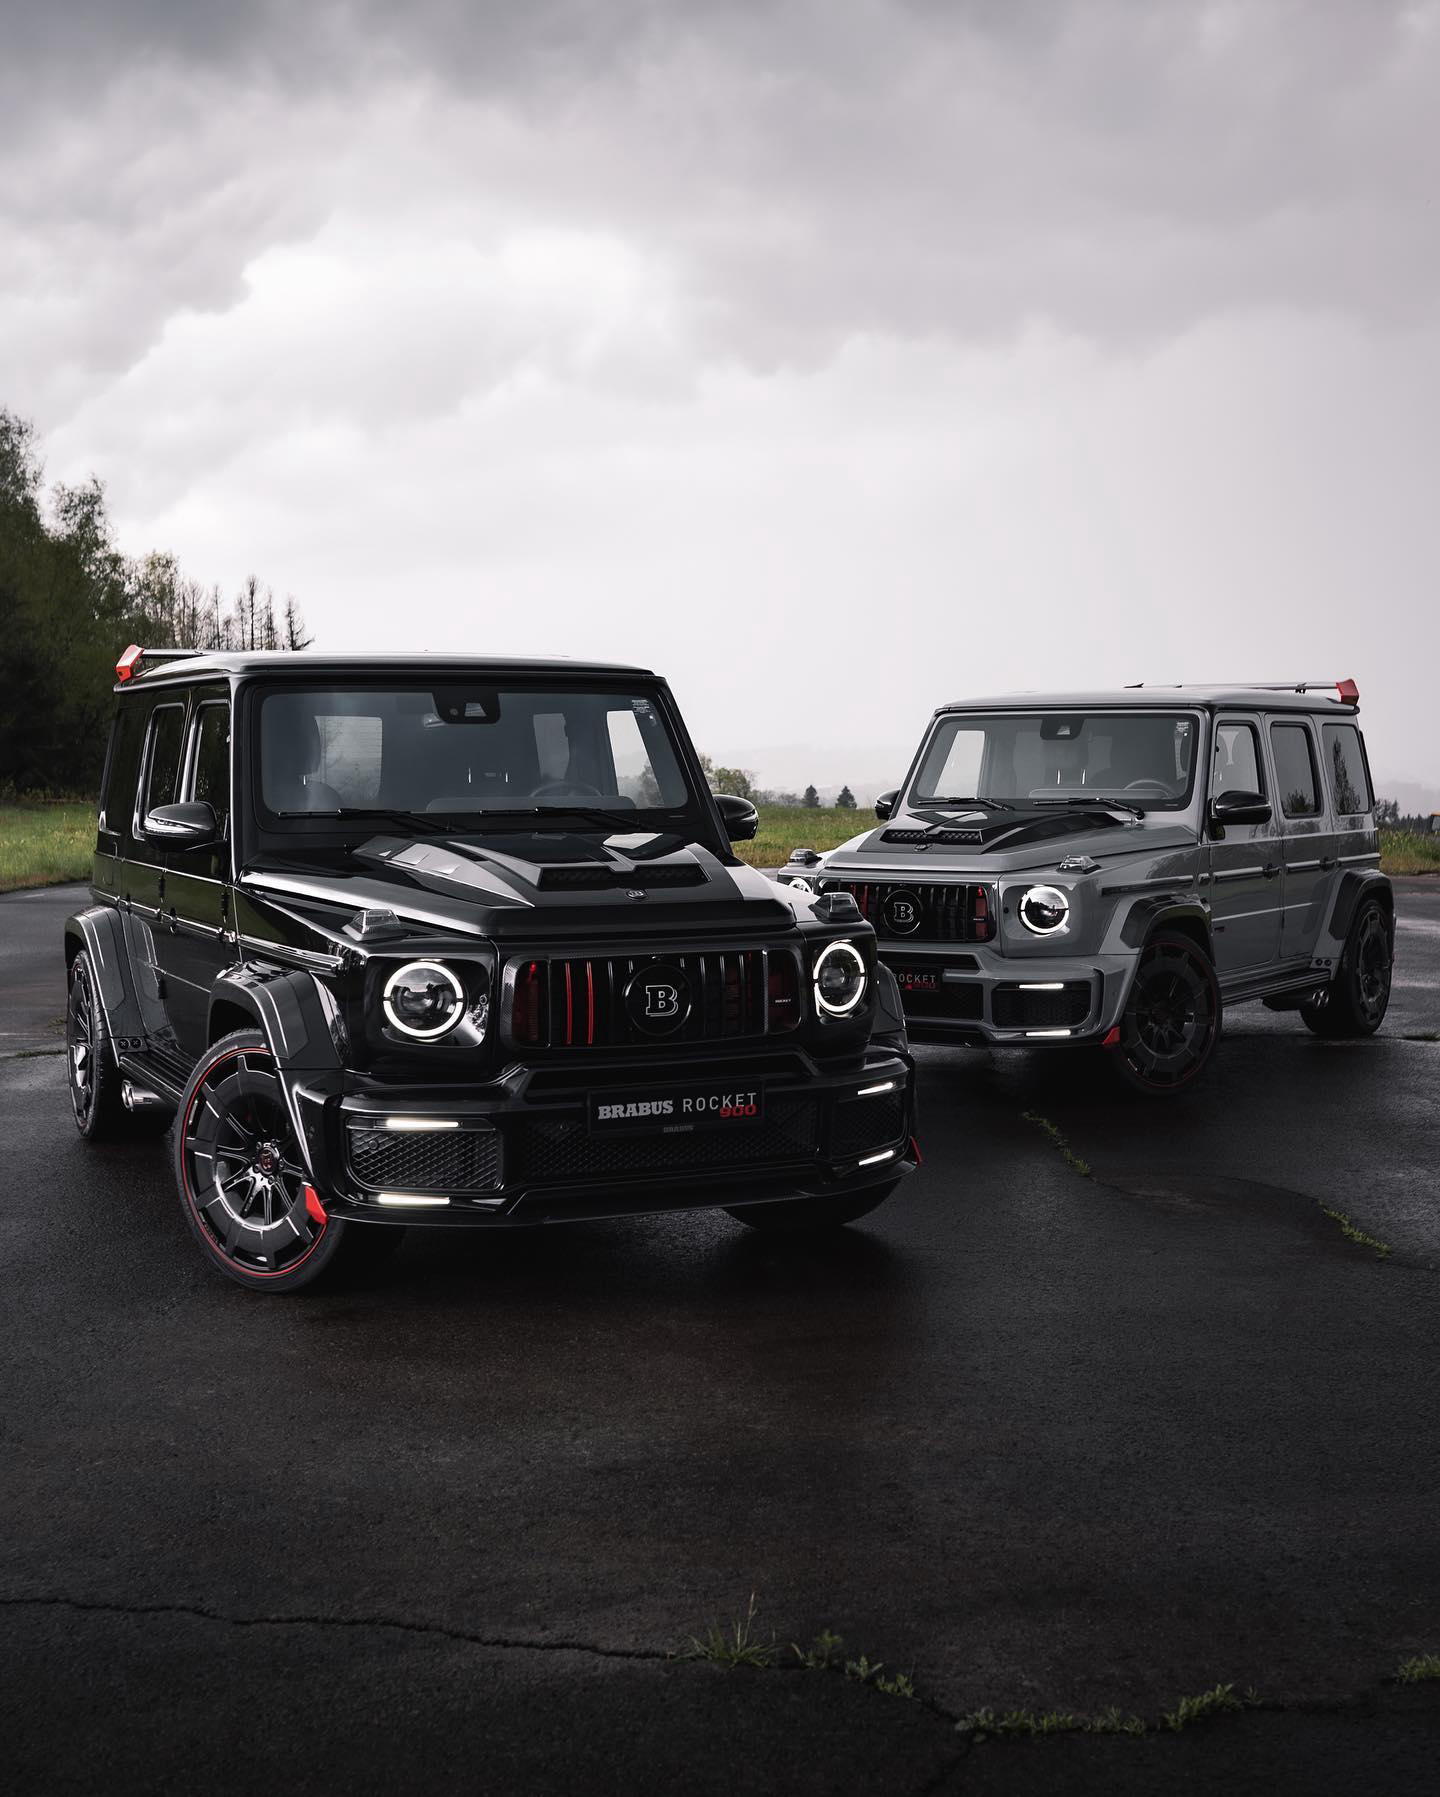 image  1 BRABUS - A legacy of high-performance, made in Germany